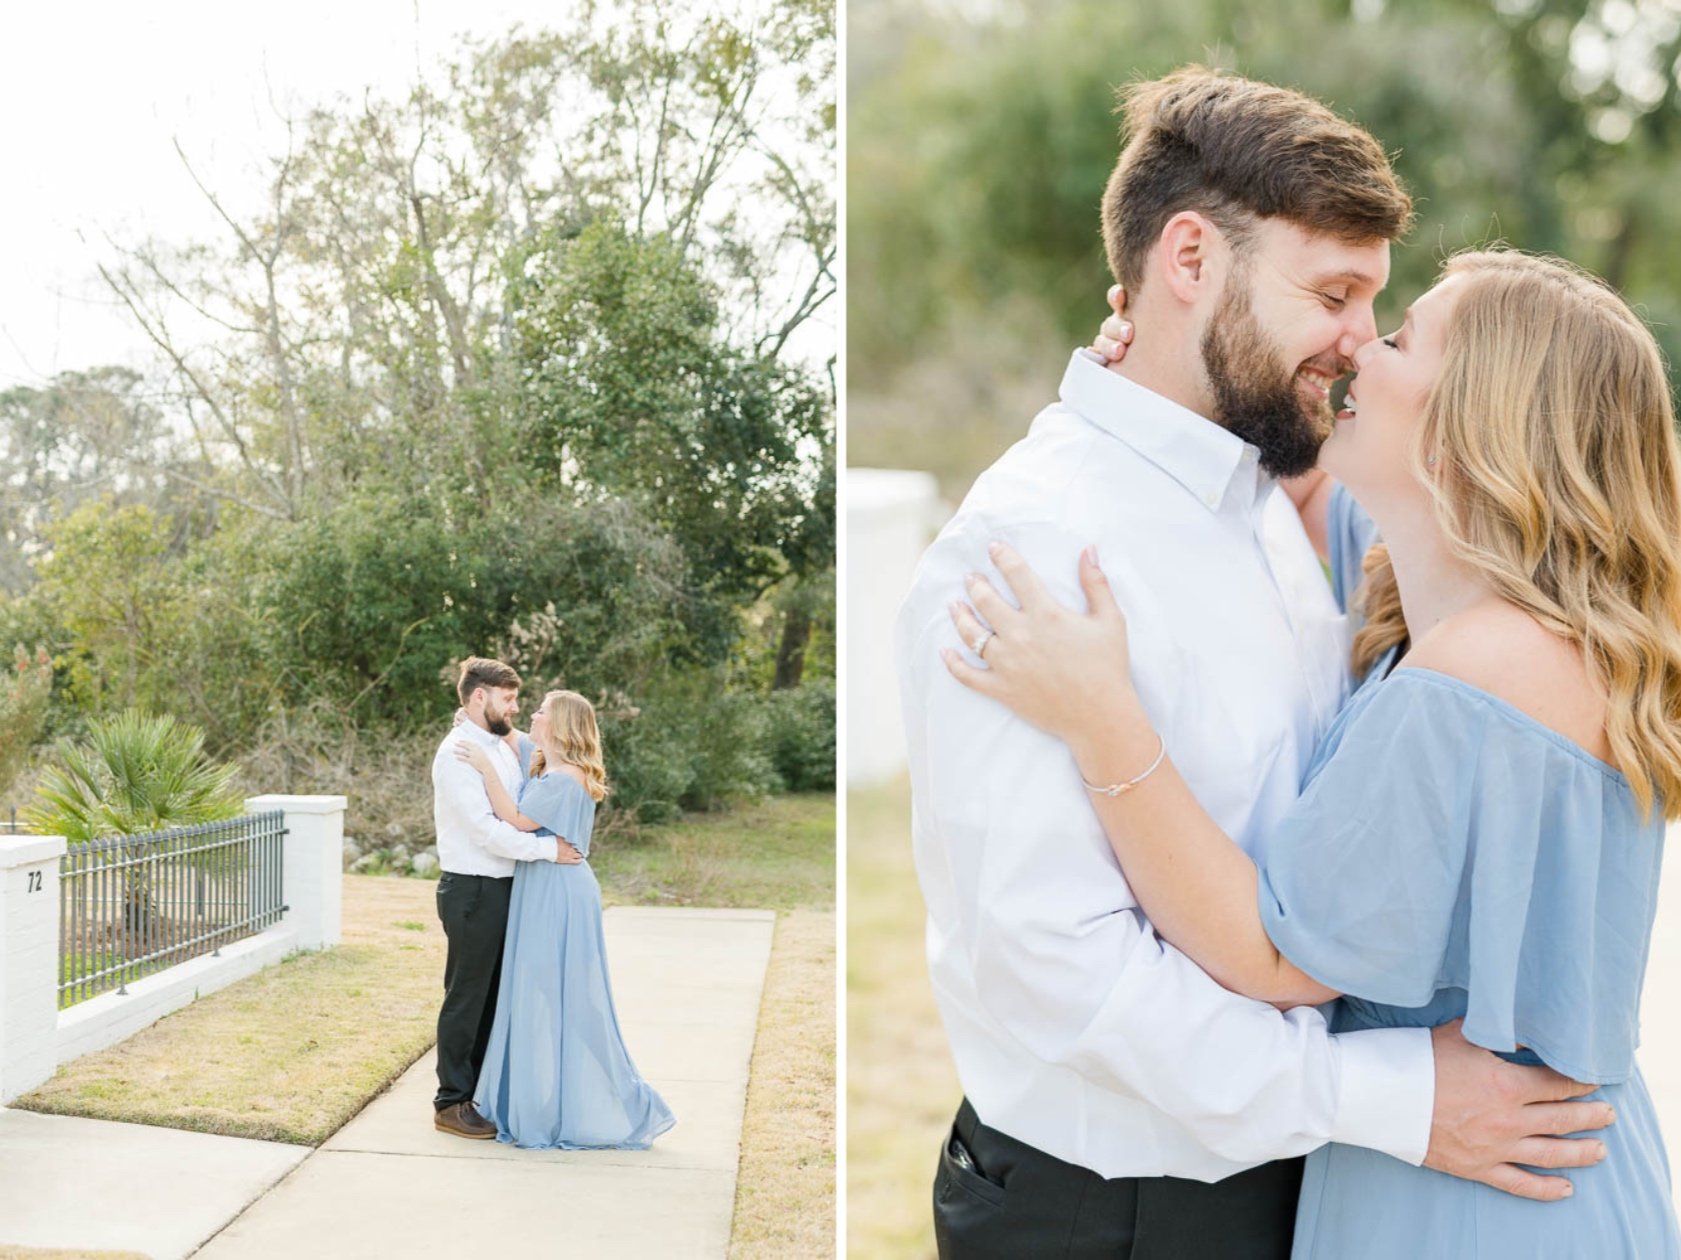 Fairhope Alabama Engagement Session Photoshoot Photographed by Kristen Marcus Photography